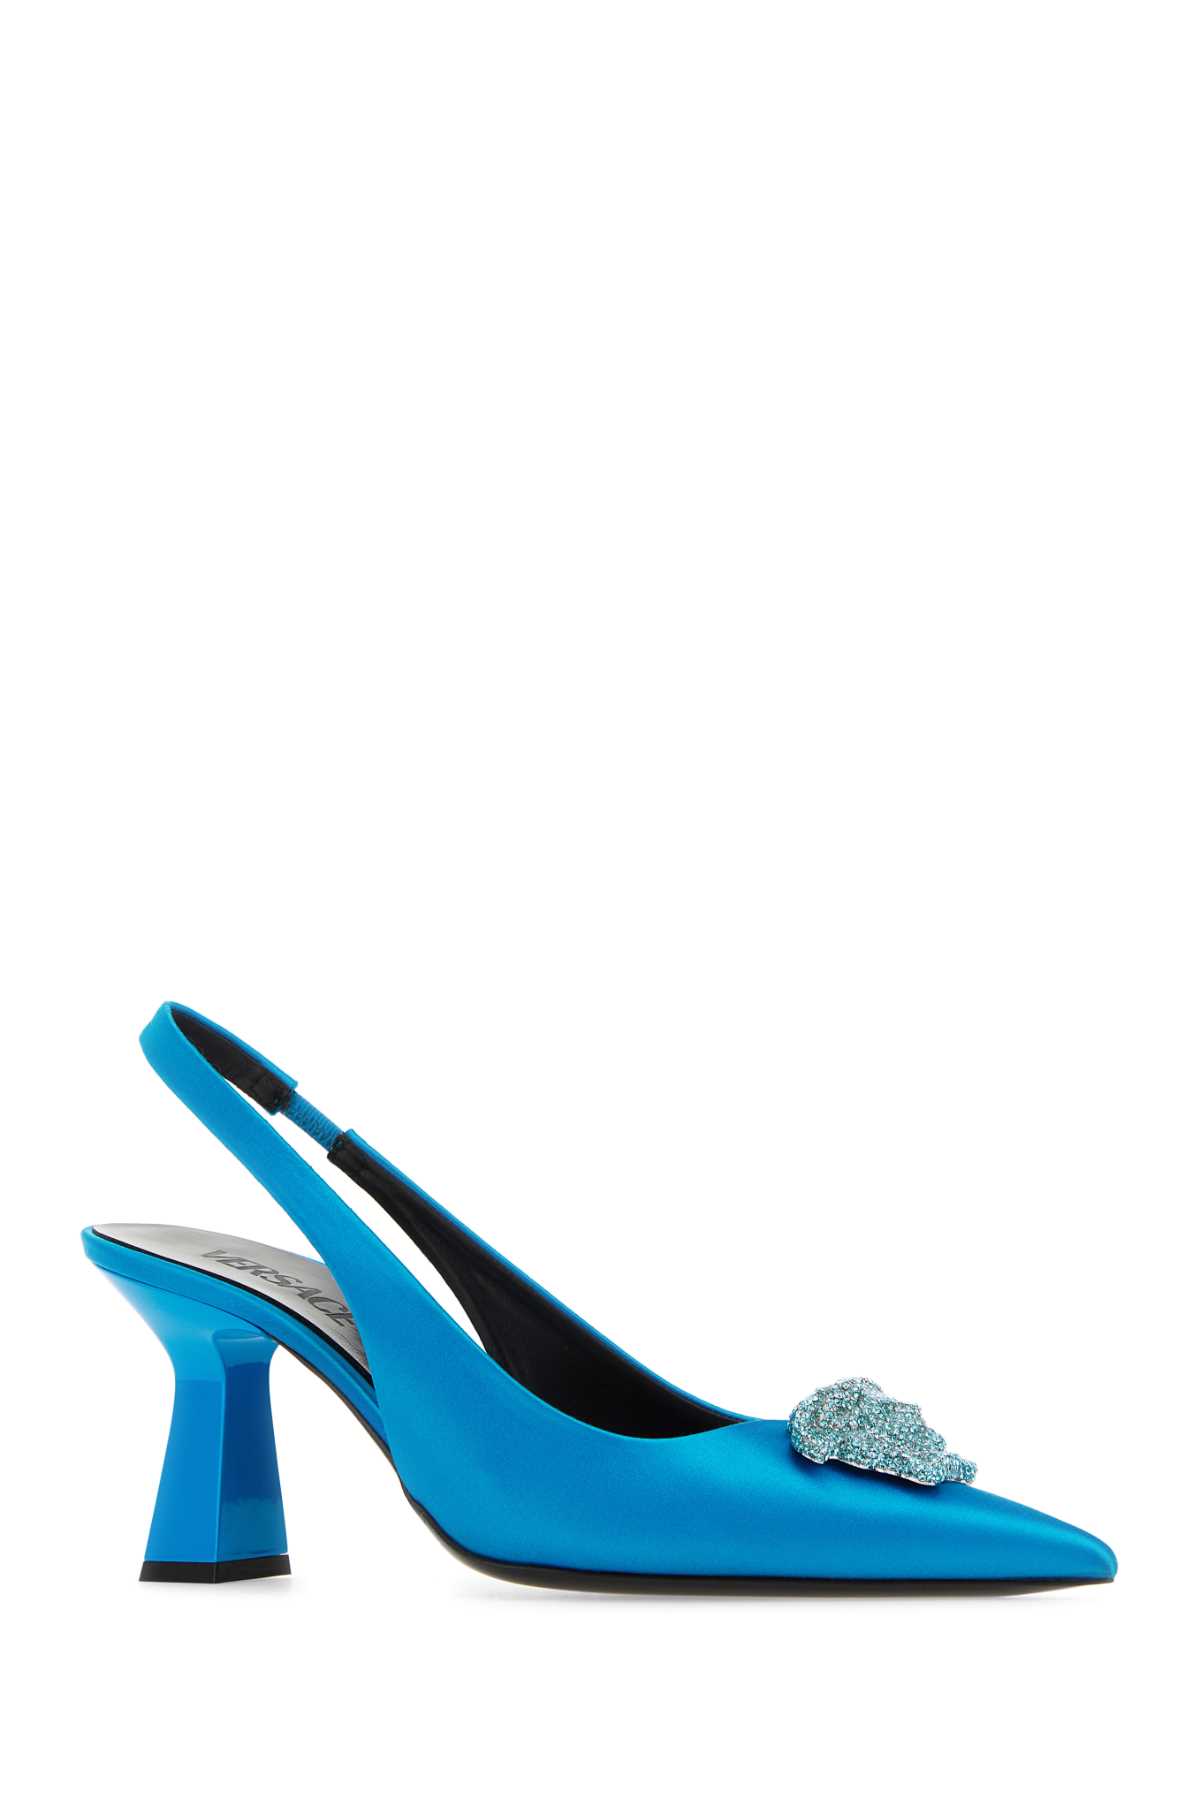 Versace Turquoise Satin Pumps In 1vb70